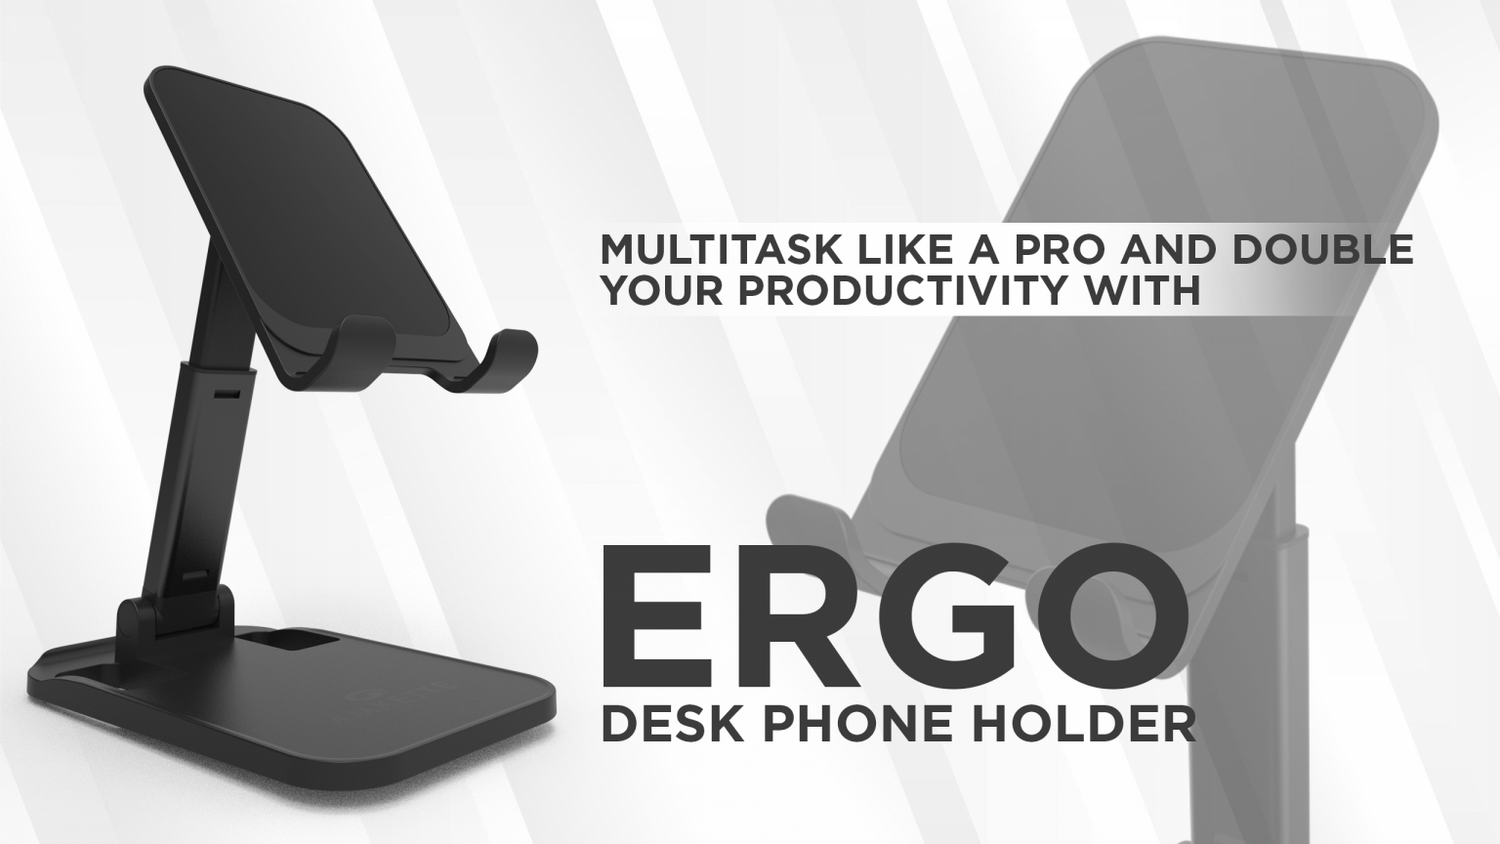 Multitask Like A Pro And Double Your Productivity With The Ergo Desk Phone Holder